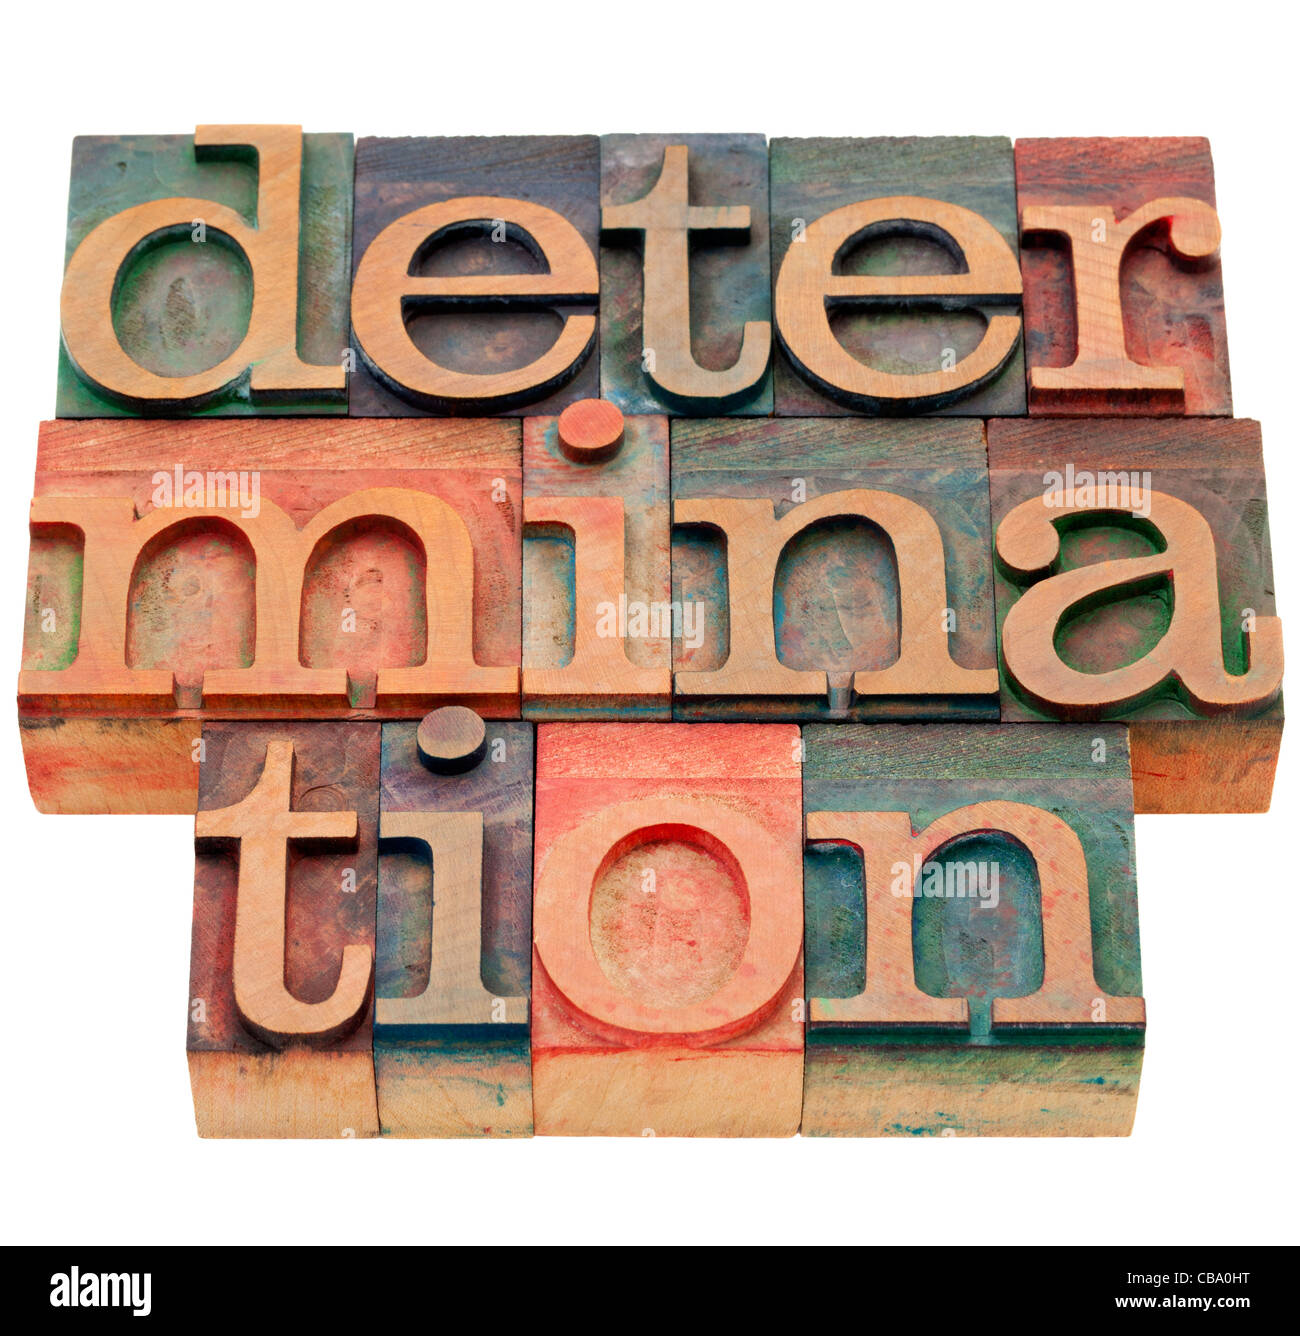 determination word - isolated abstract in vintage wood letterpress printing blocks Stock Photo